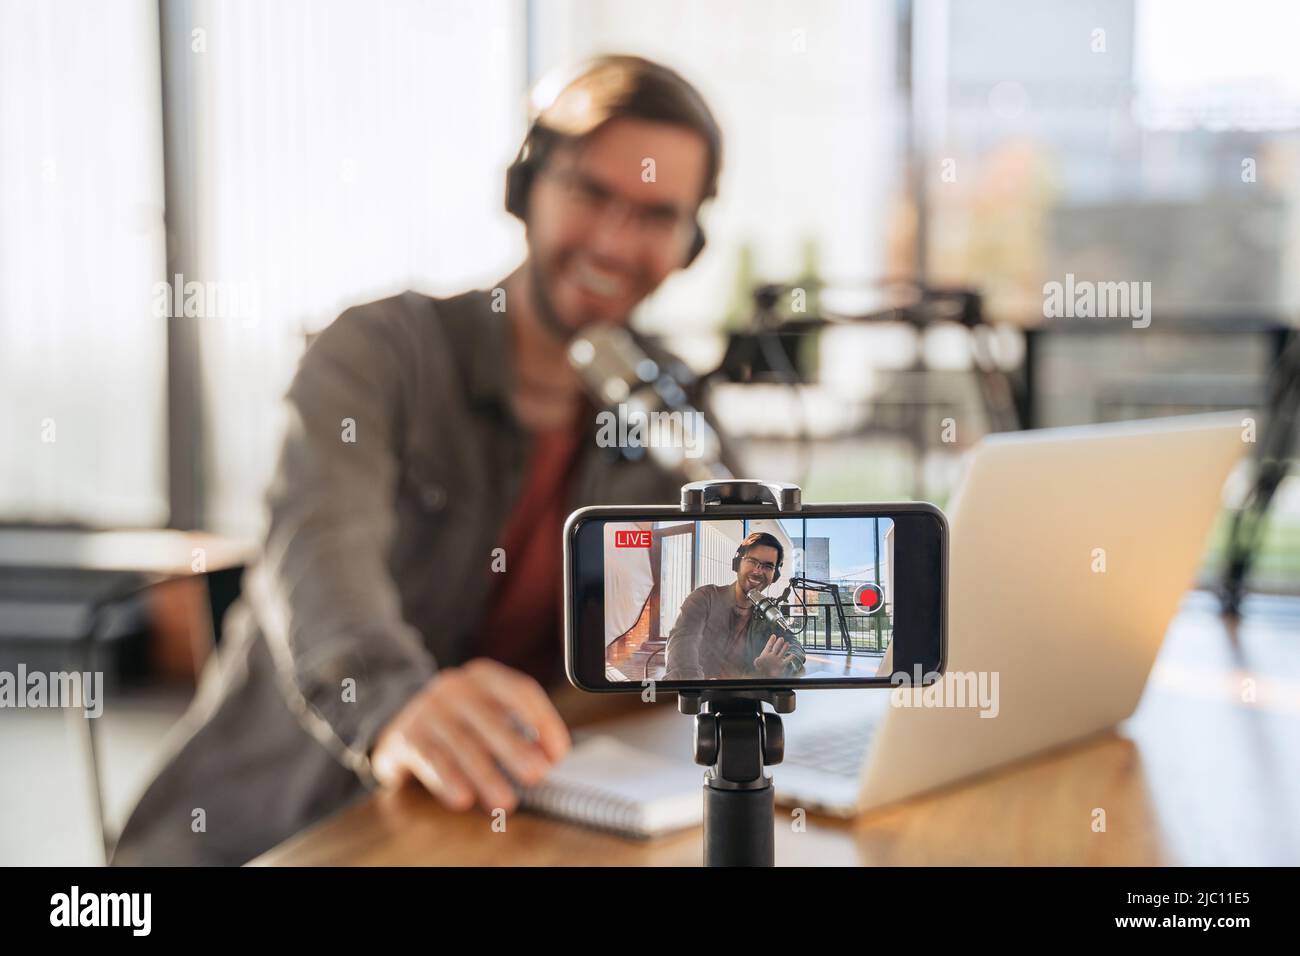 Male trendy podcast creator recording video podcast on smartphone. Selective focus on smartphone camera screen with man podcaster vlogger in headphones and glasses shooting live video for his channel Stock Photo